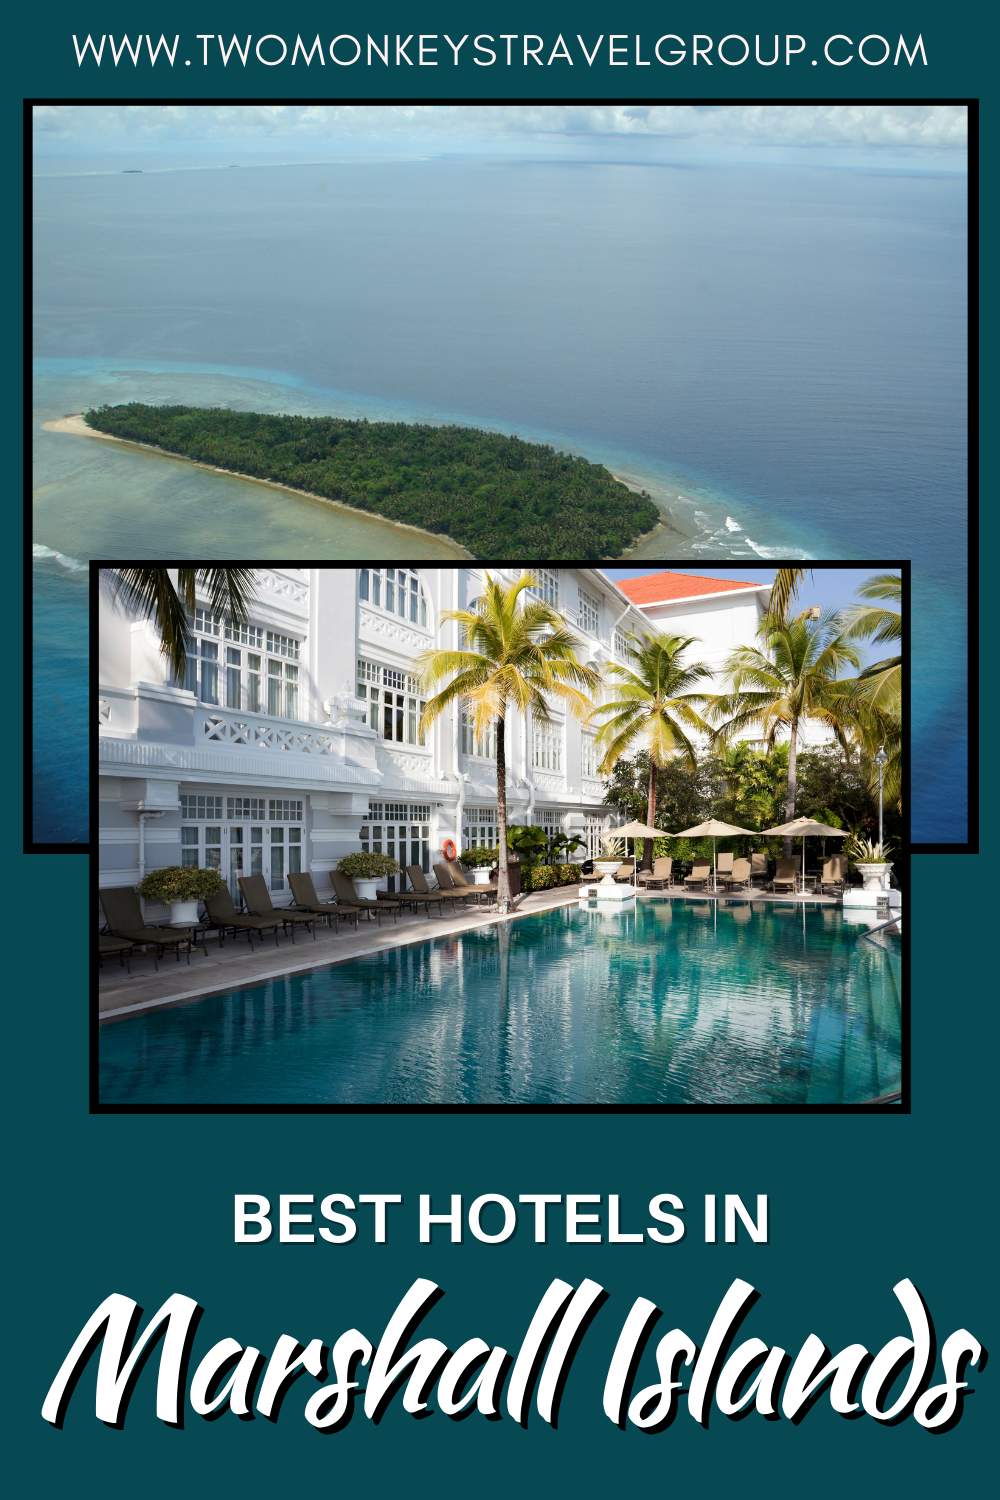 List of the Best Hotels in Marshall Islands (Pacific Ocean) Budget to Luxury